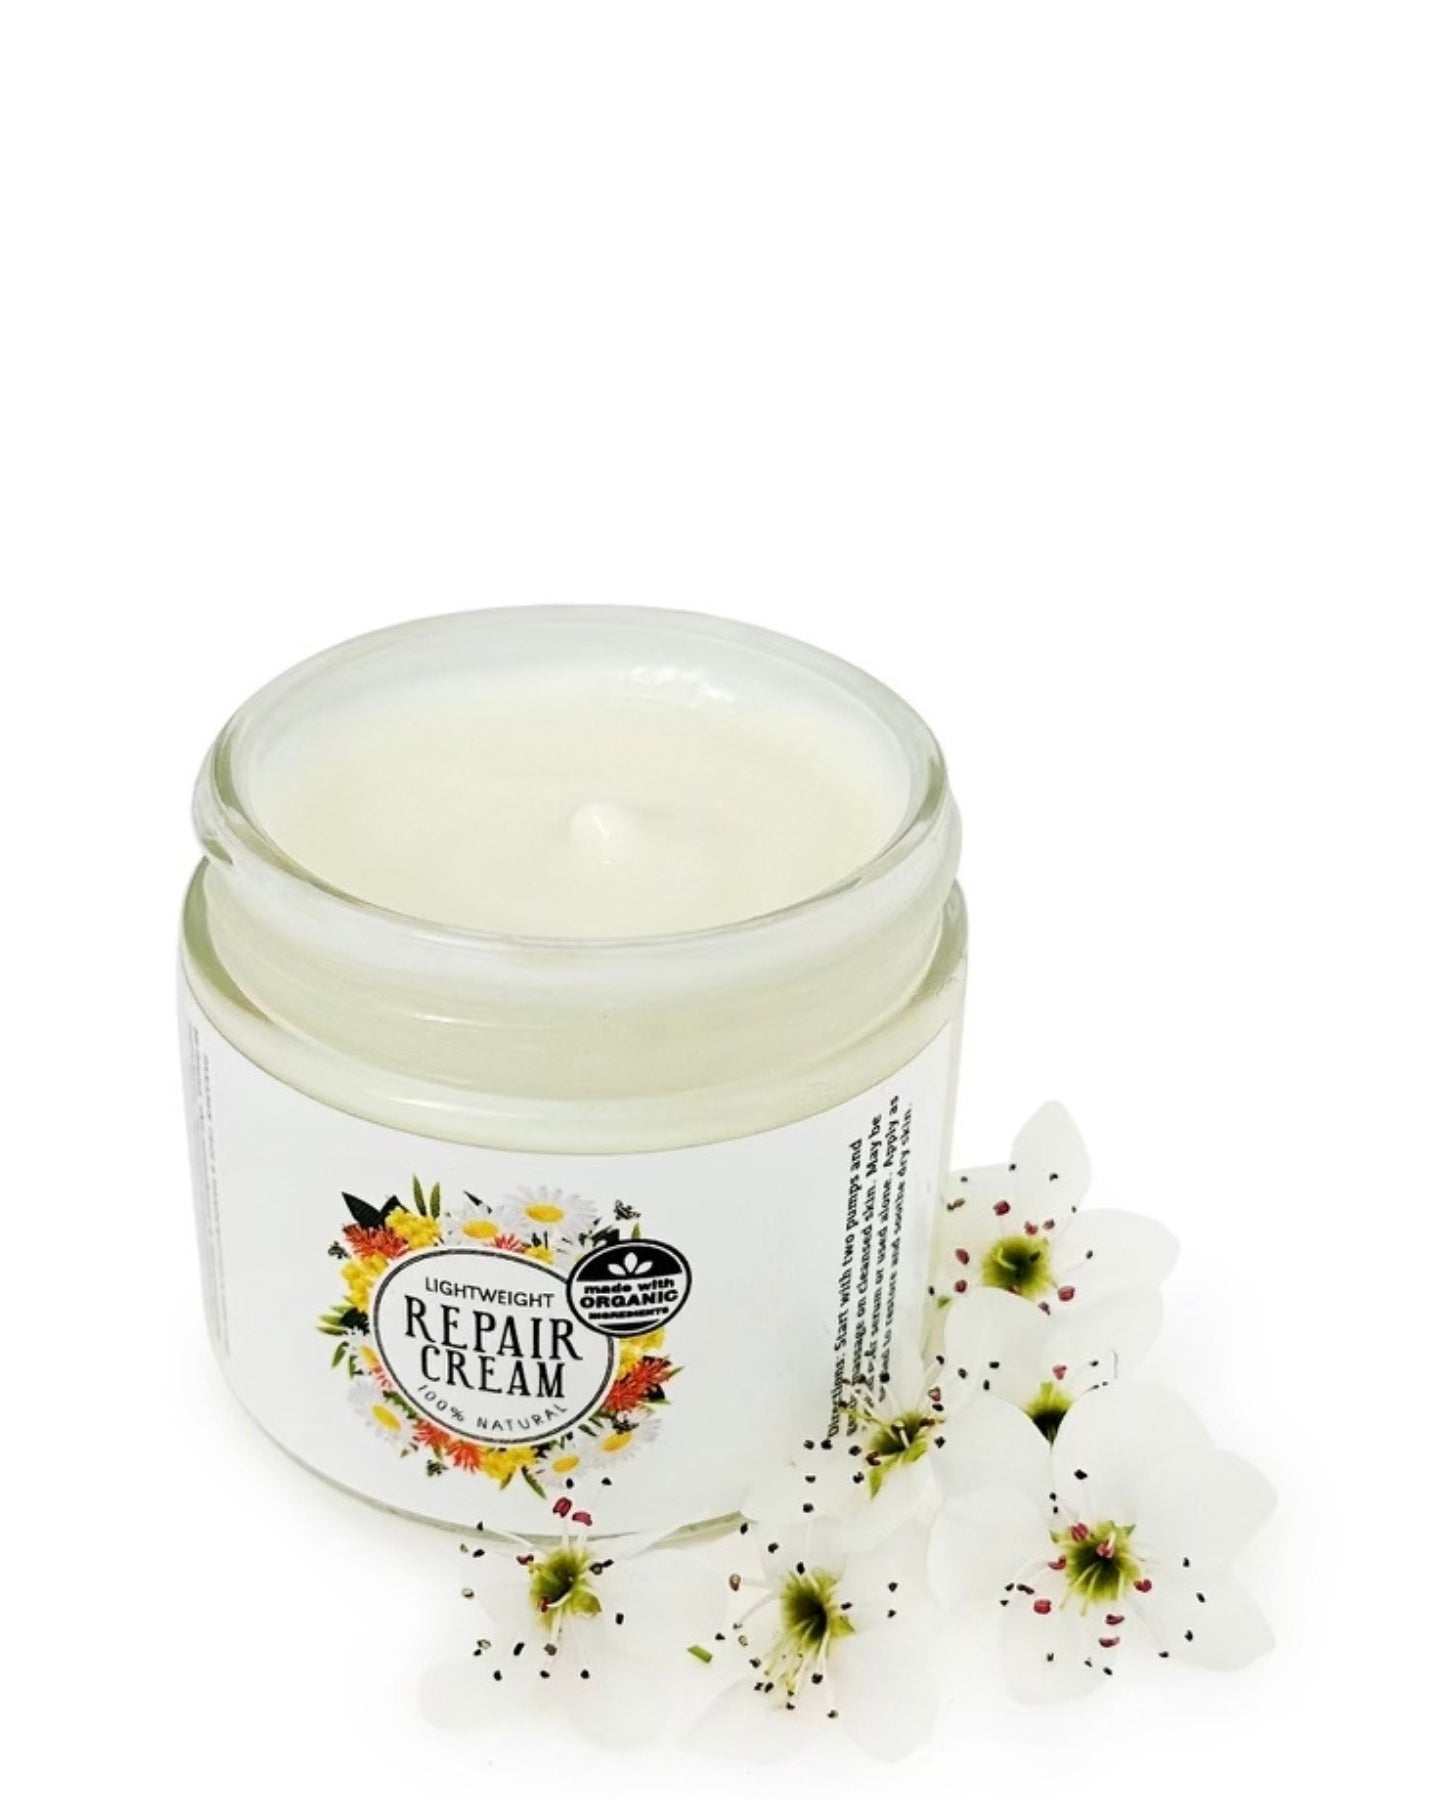 Repair Cream without the lid surrounded by white flowers against a white background.